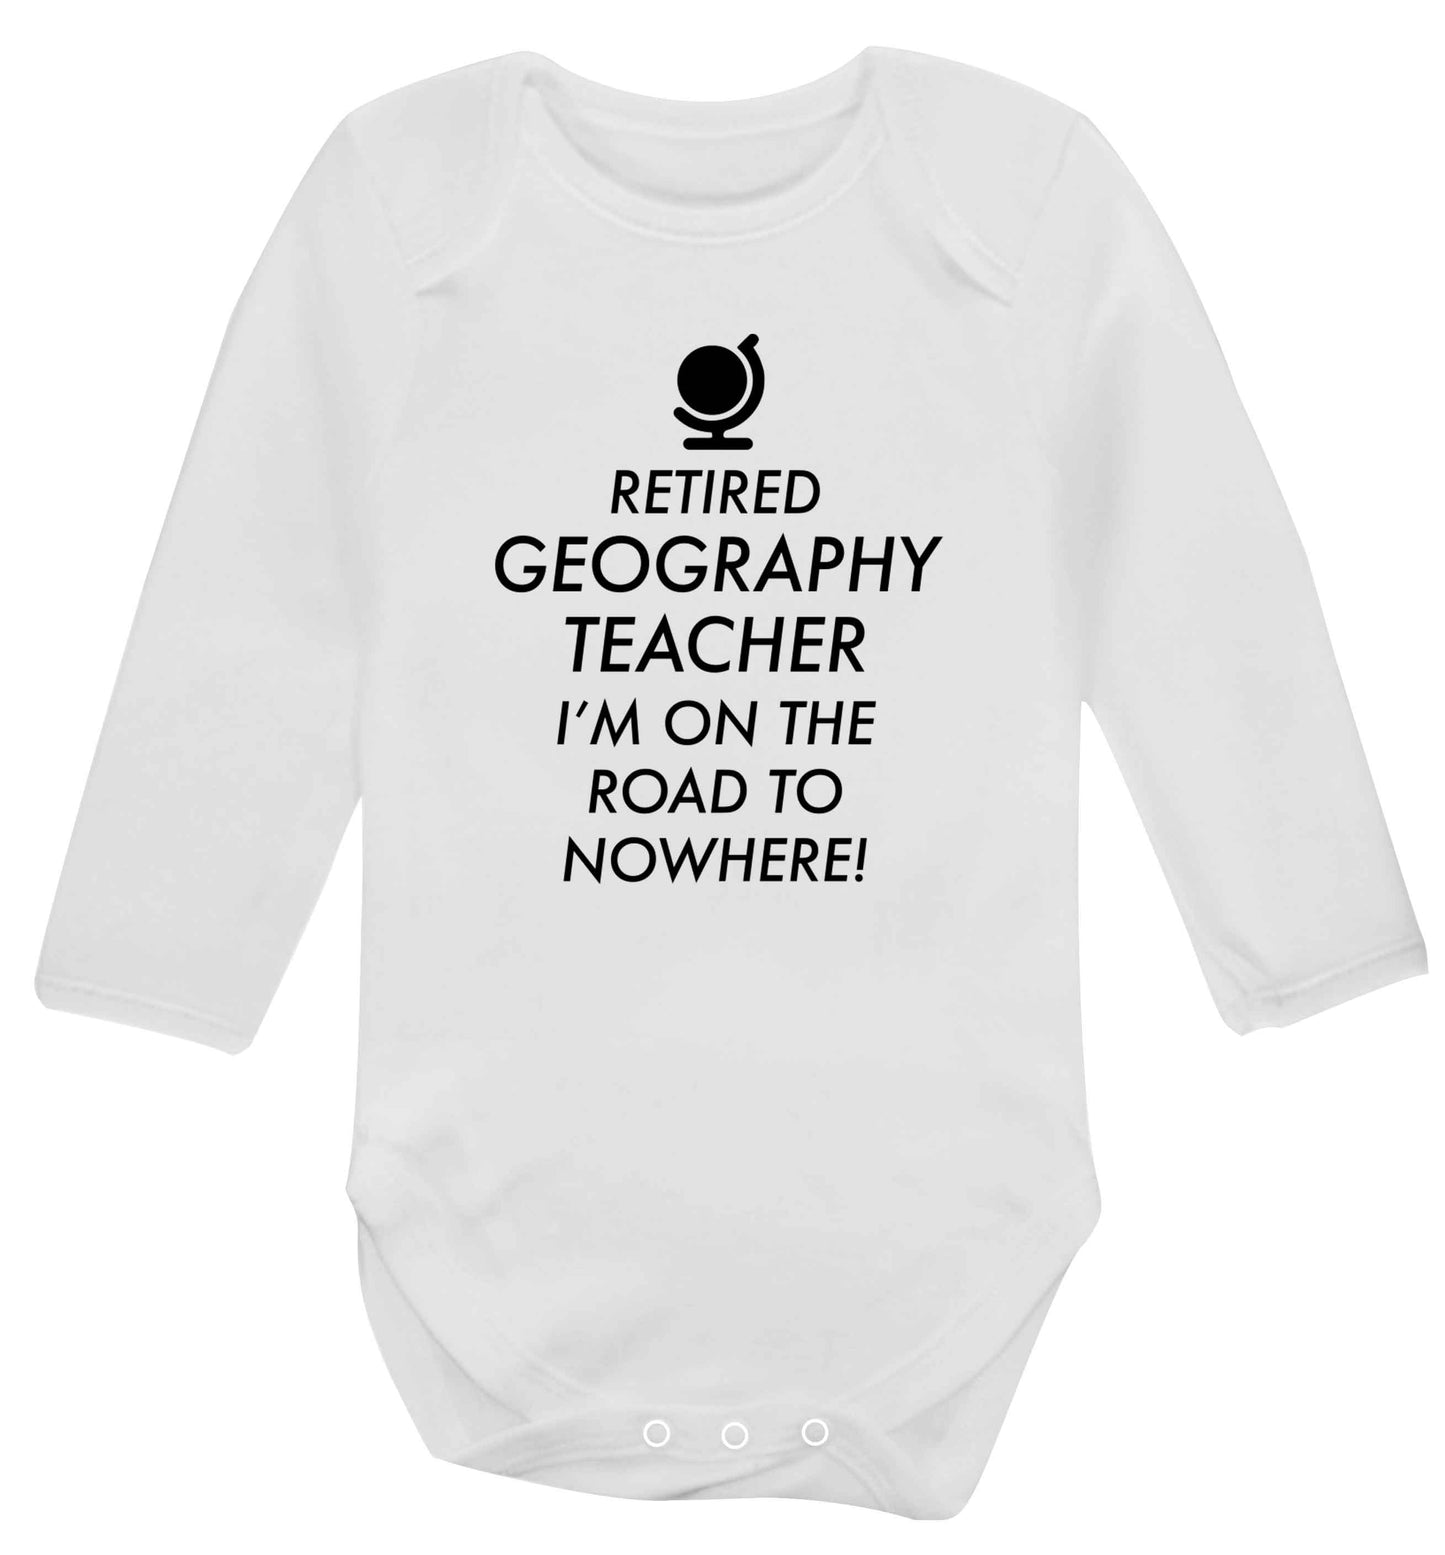 Retired geography teacher I'm on the road to nowhere Baby Vest long sleeved white 6-12 months